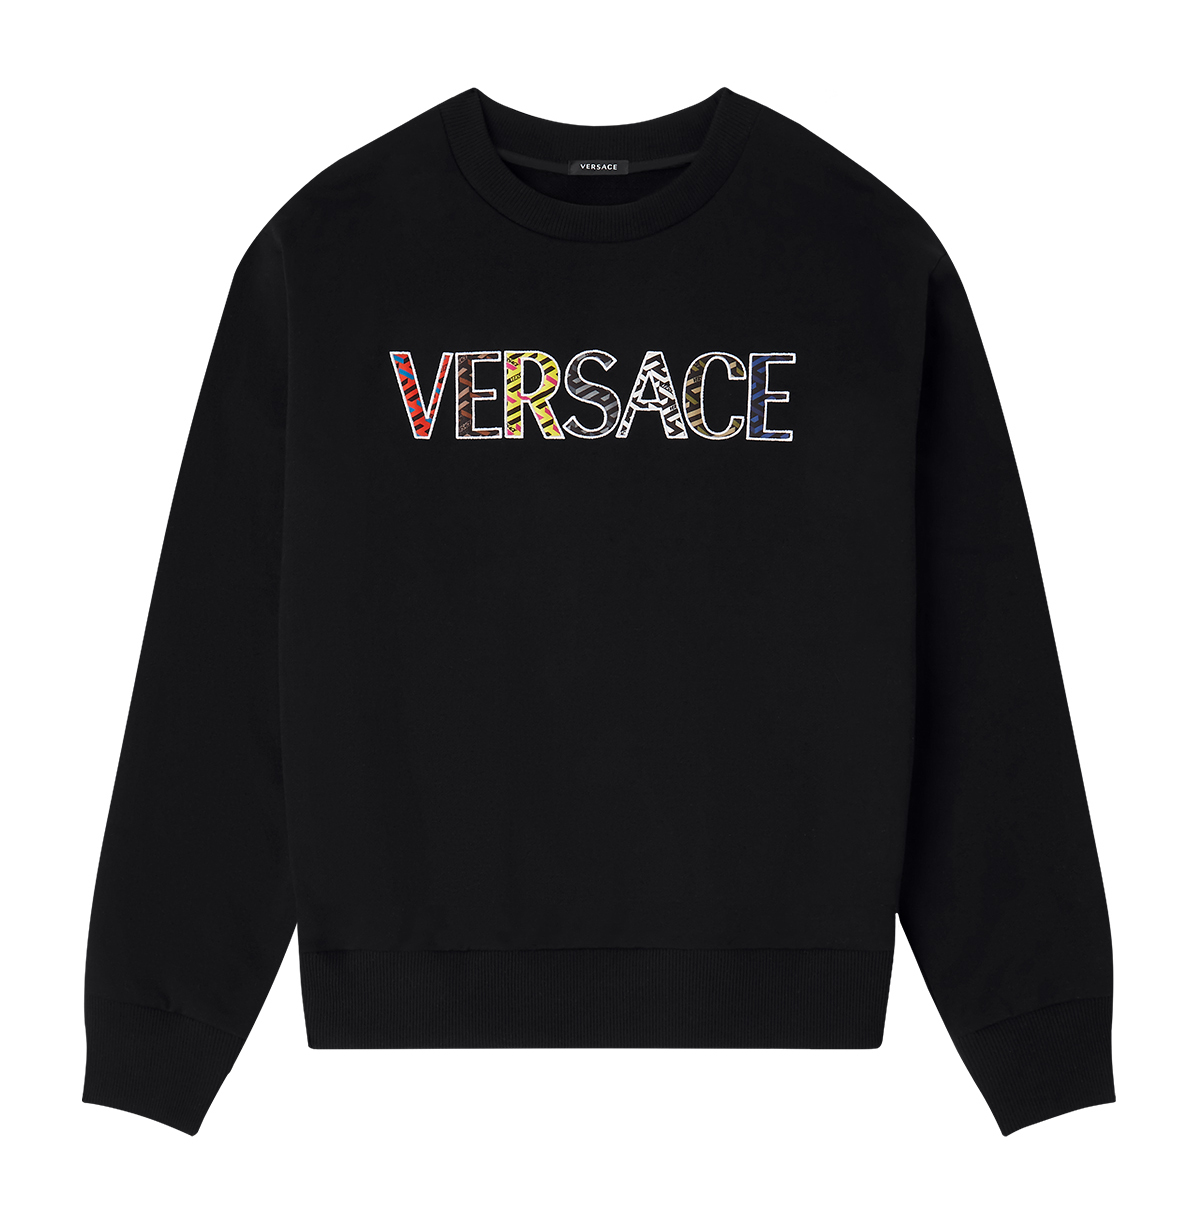 The Coolest Sweatshirts To Wear This Autumn